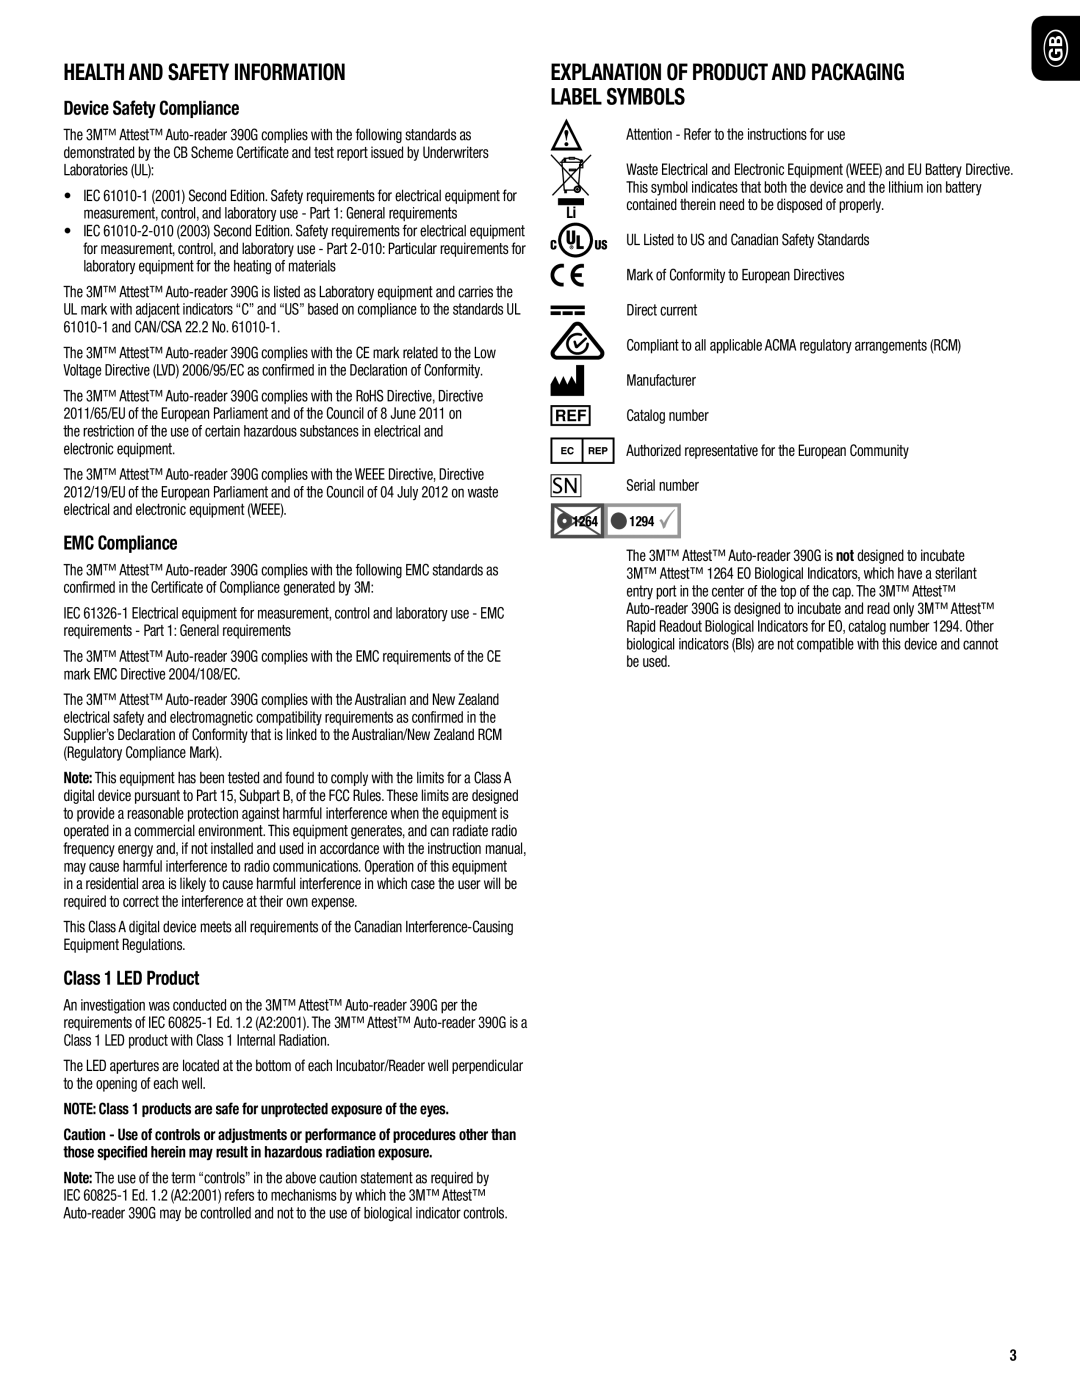 3M 390G Health And Safety Information, Explanation Of Product And Packaging Label Symbols, Device Safety Compliance 